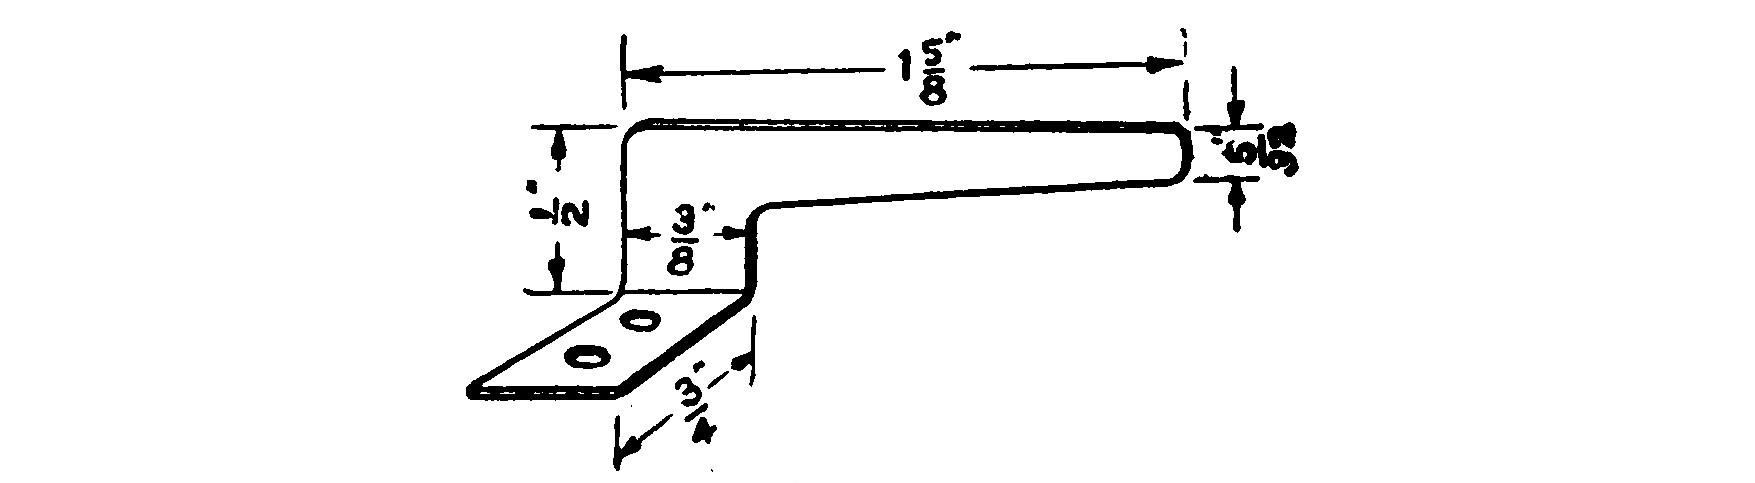 FIG. 38.—The Brush which bears against the Contact.